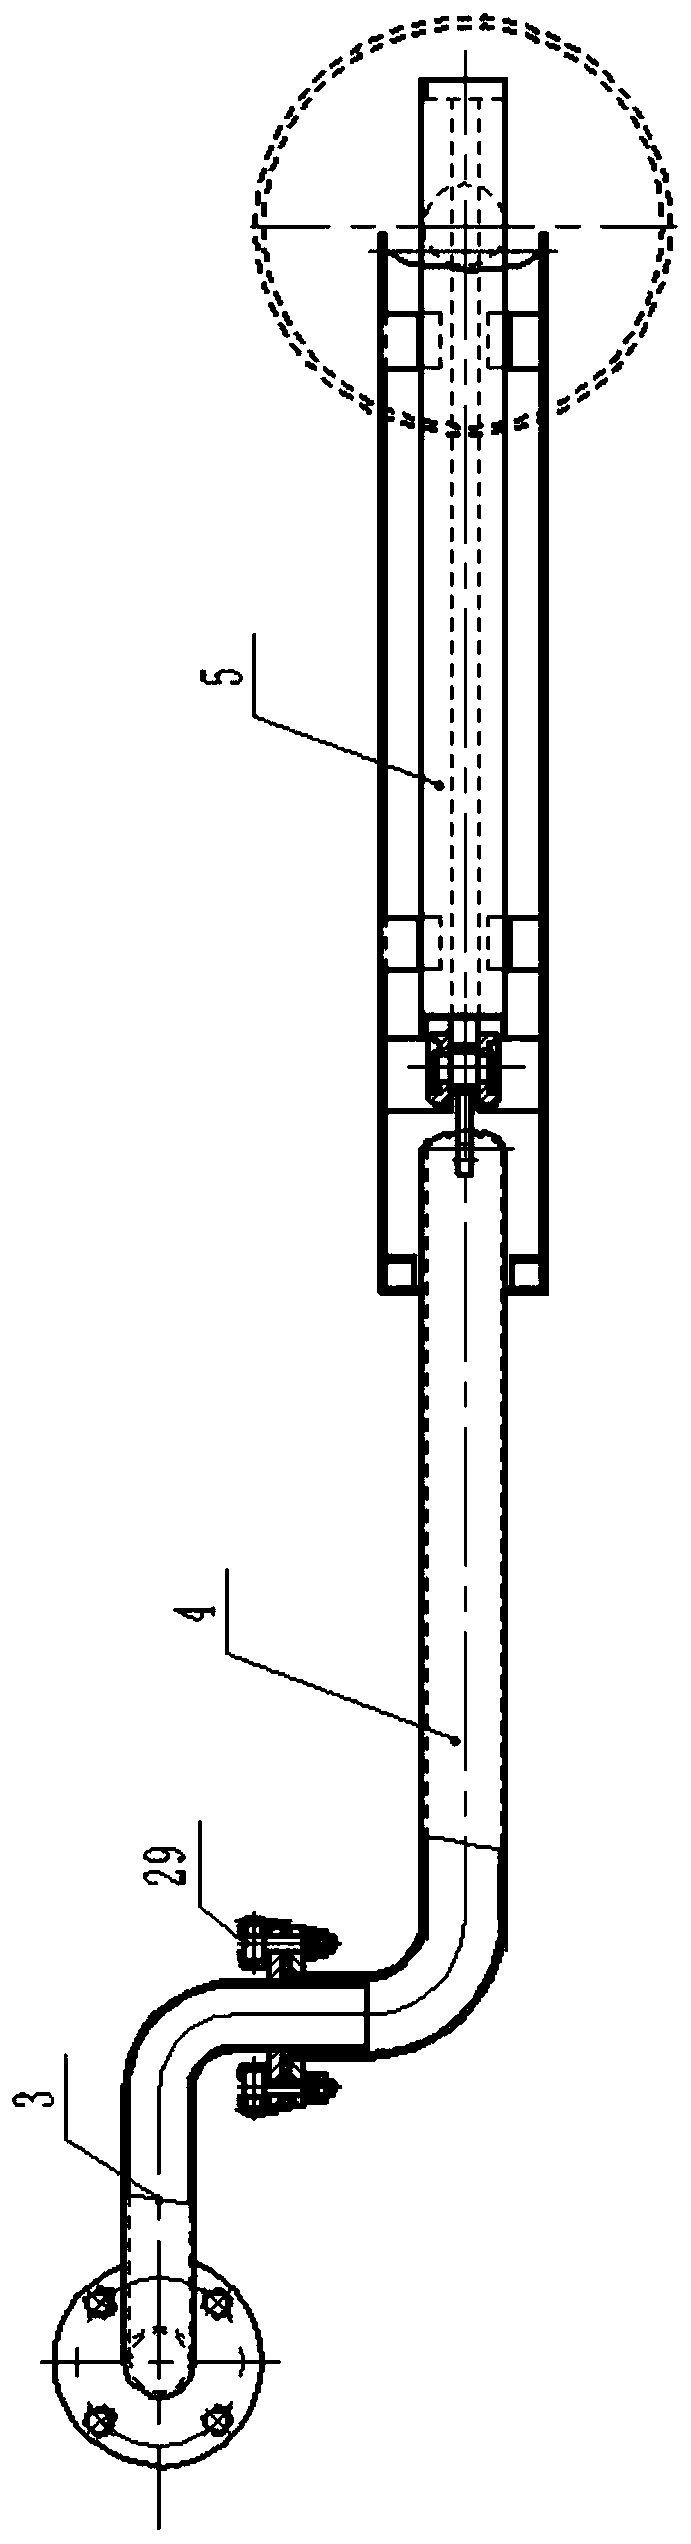 A diversion device for aluminum ingot turning and melting furnace